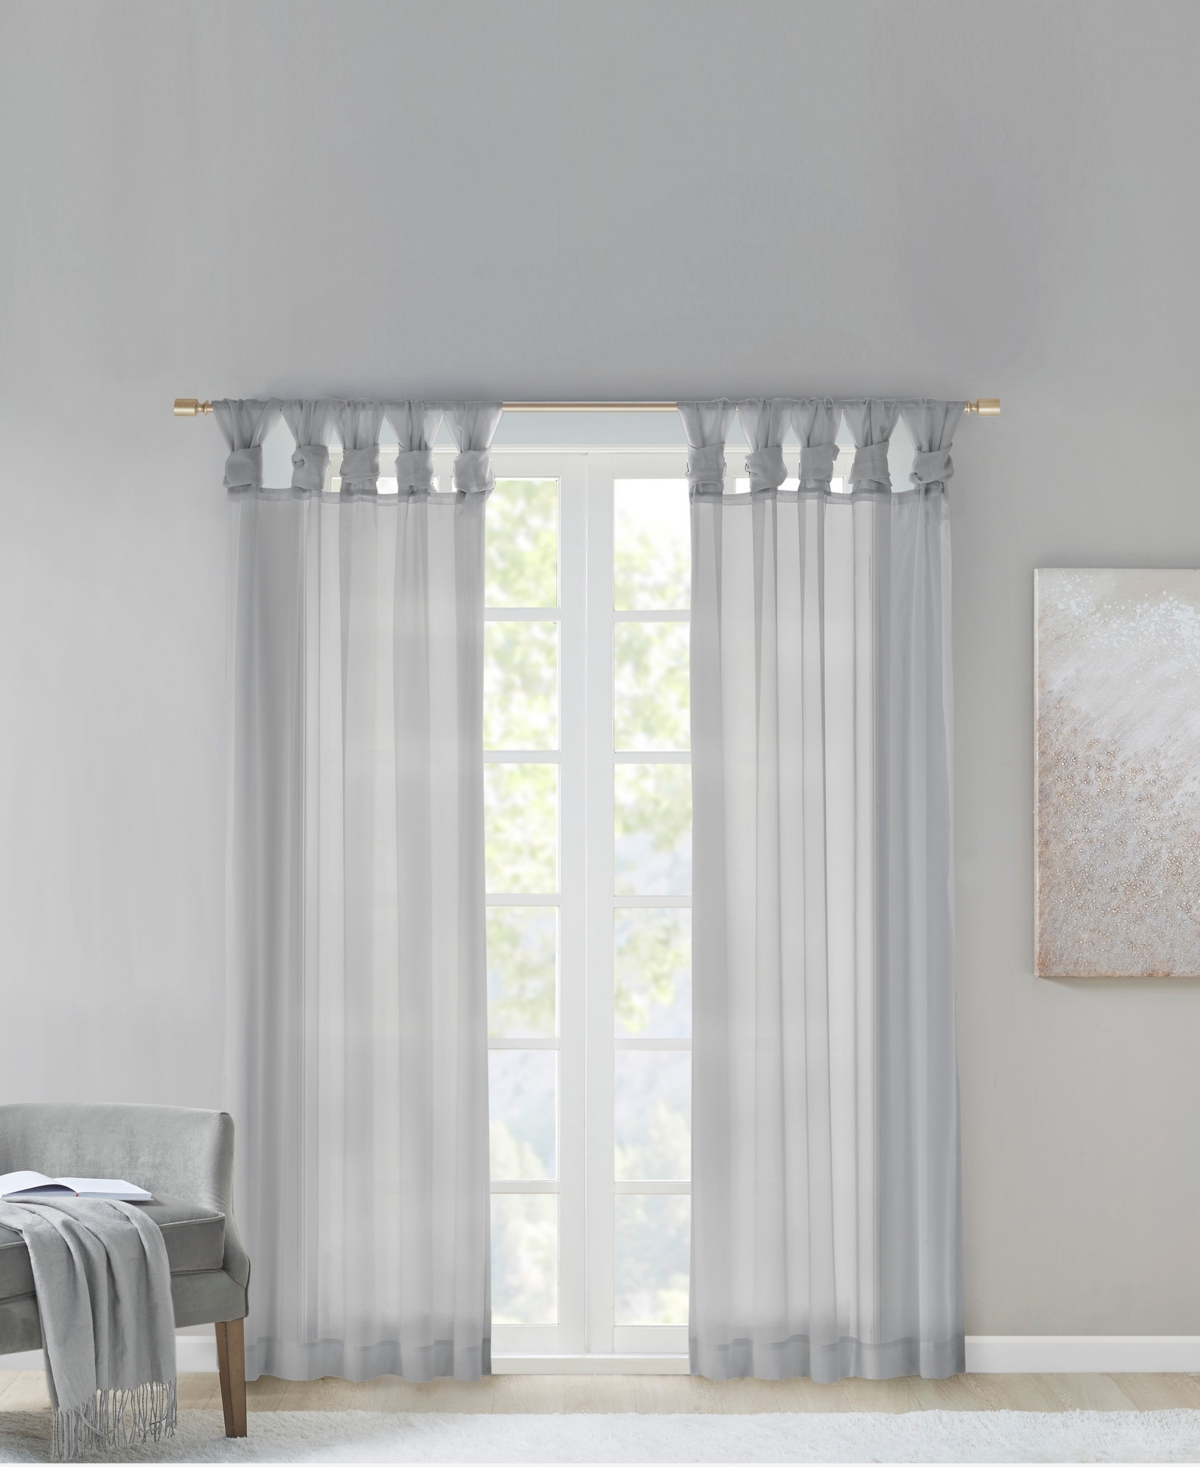 Ceres Twist Tab Voile Sheer Window Curtain Pair, 50"W x 84"L, 2 Pack - Light Grey